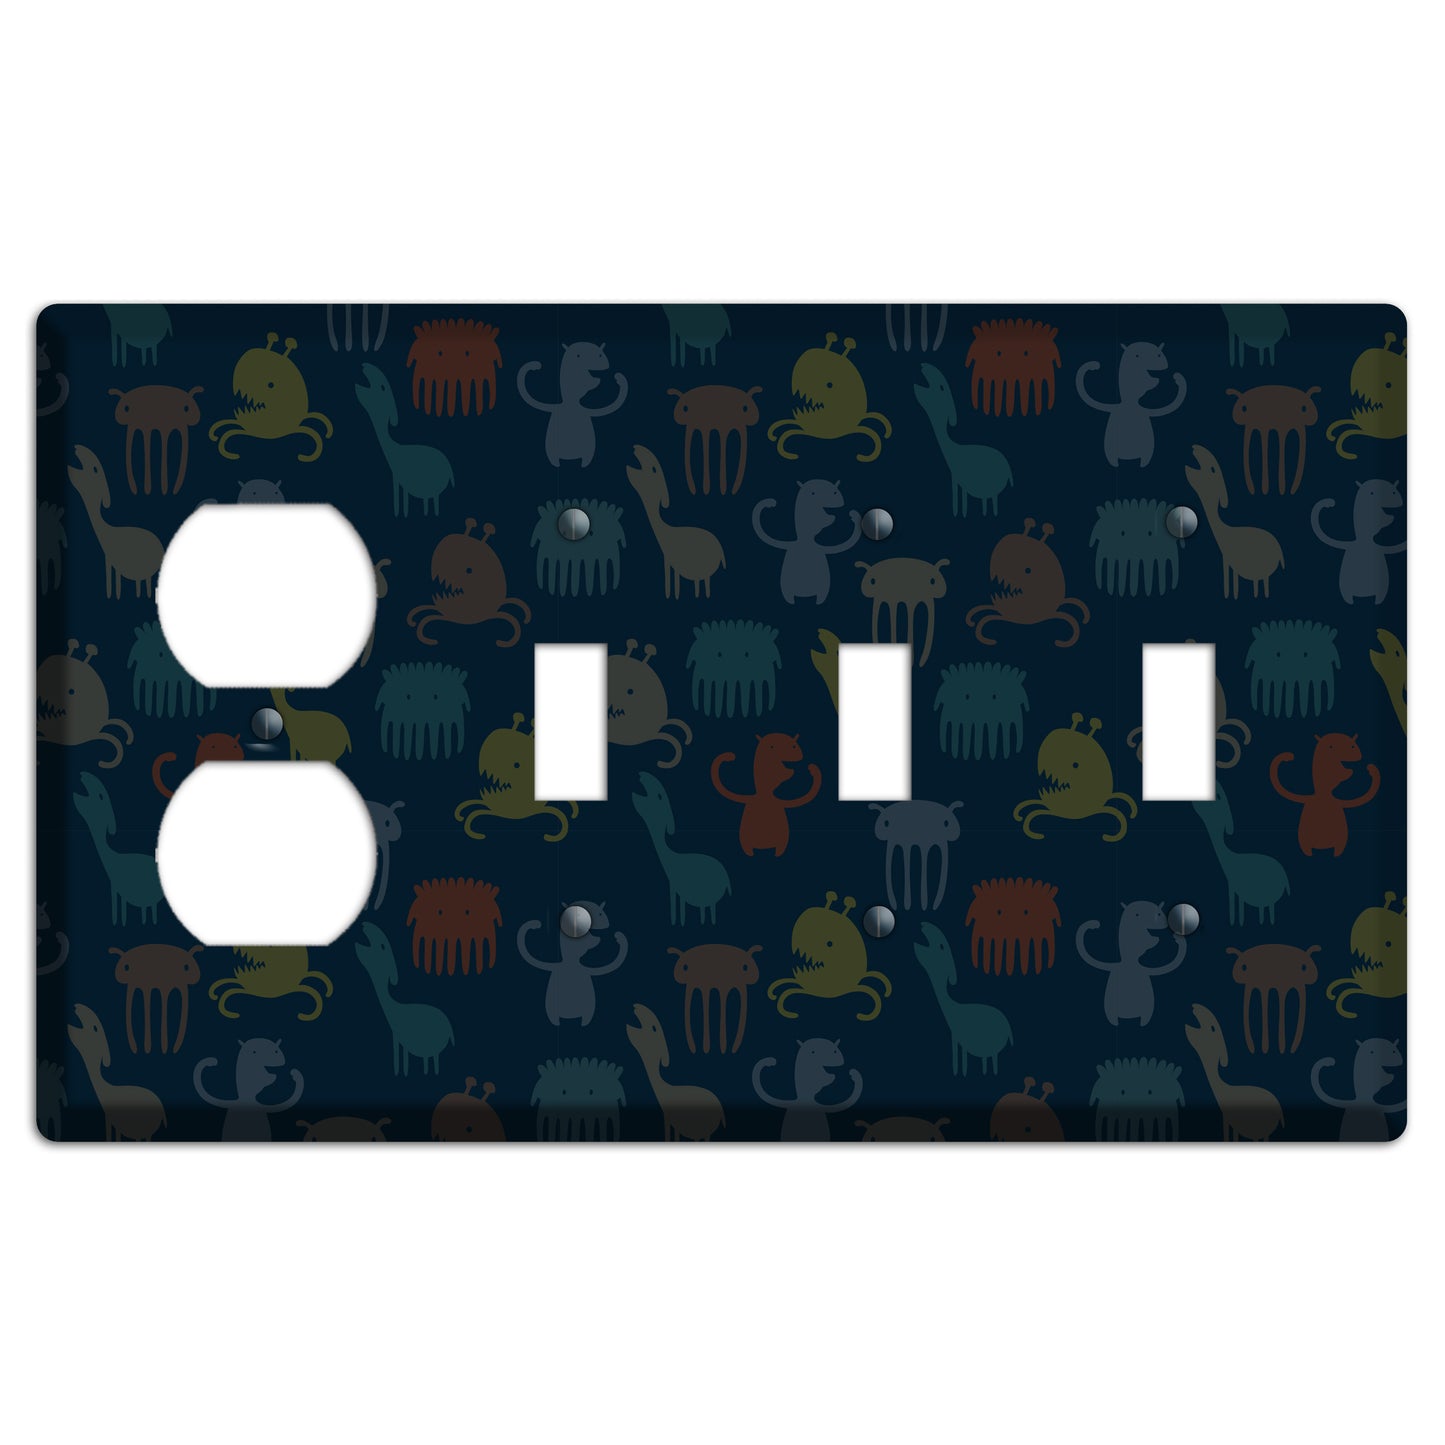 Silly Monsters Black Duplex / 3 Toggle Wallplate